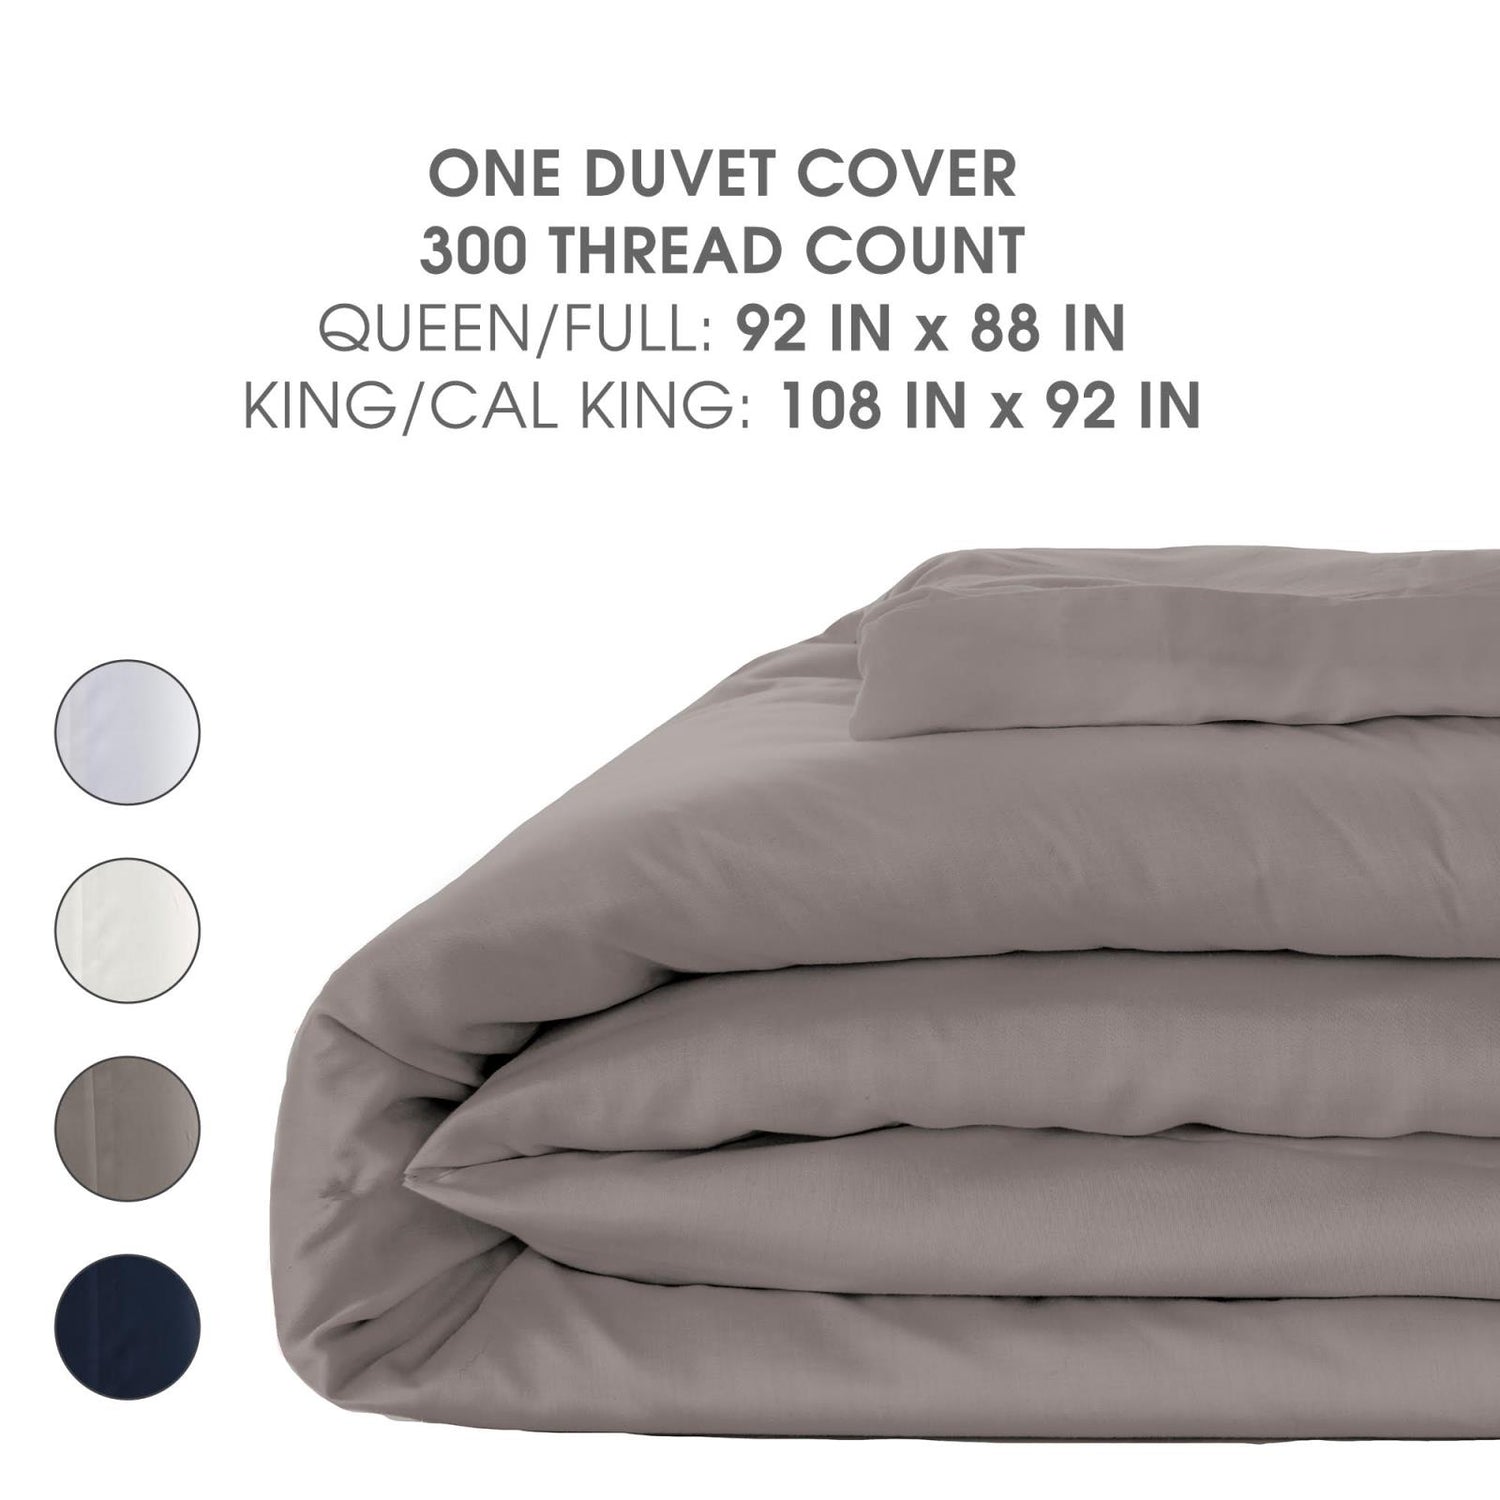 Woven Duvet Cover in Feather